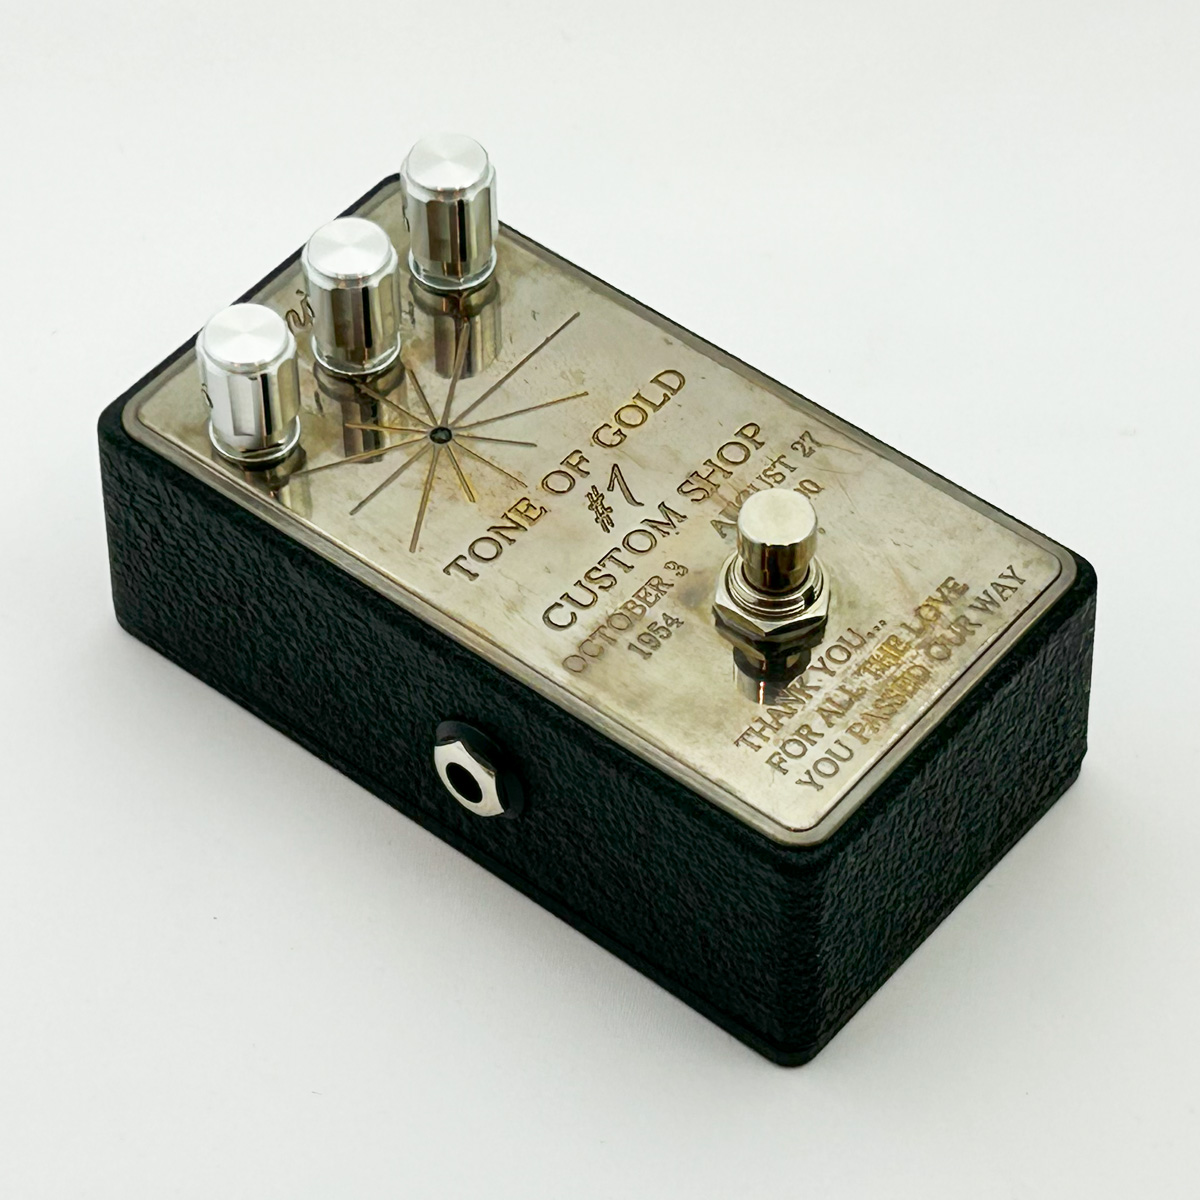 TONE OF GOLD #1 Limited（管理番号：1072） - TOKYO EFFECTOR